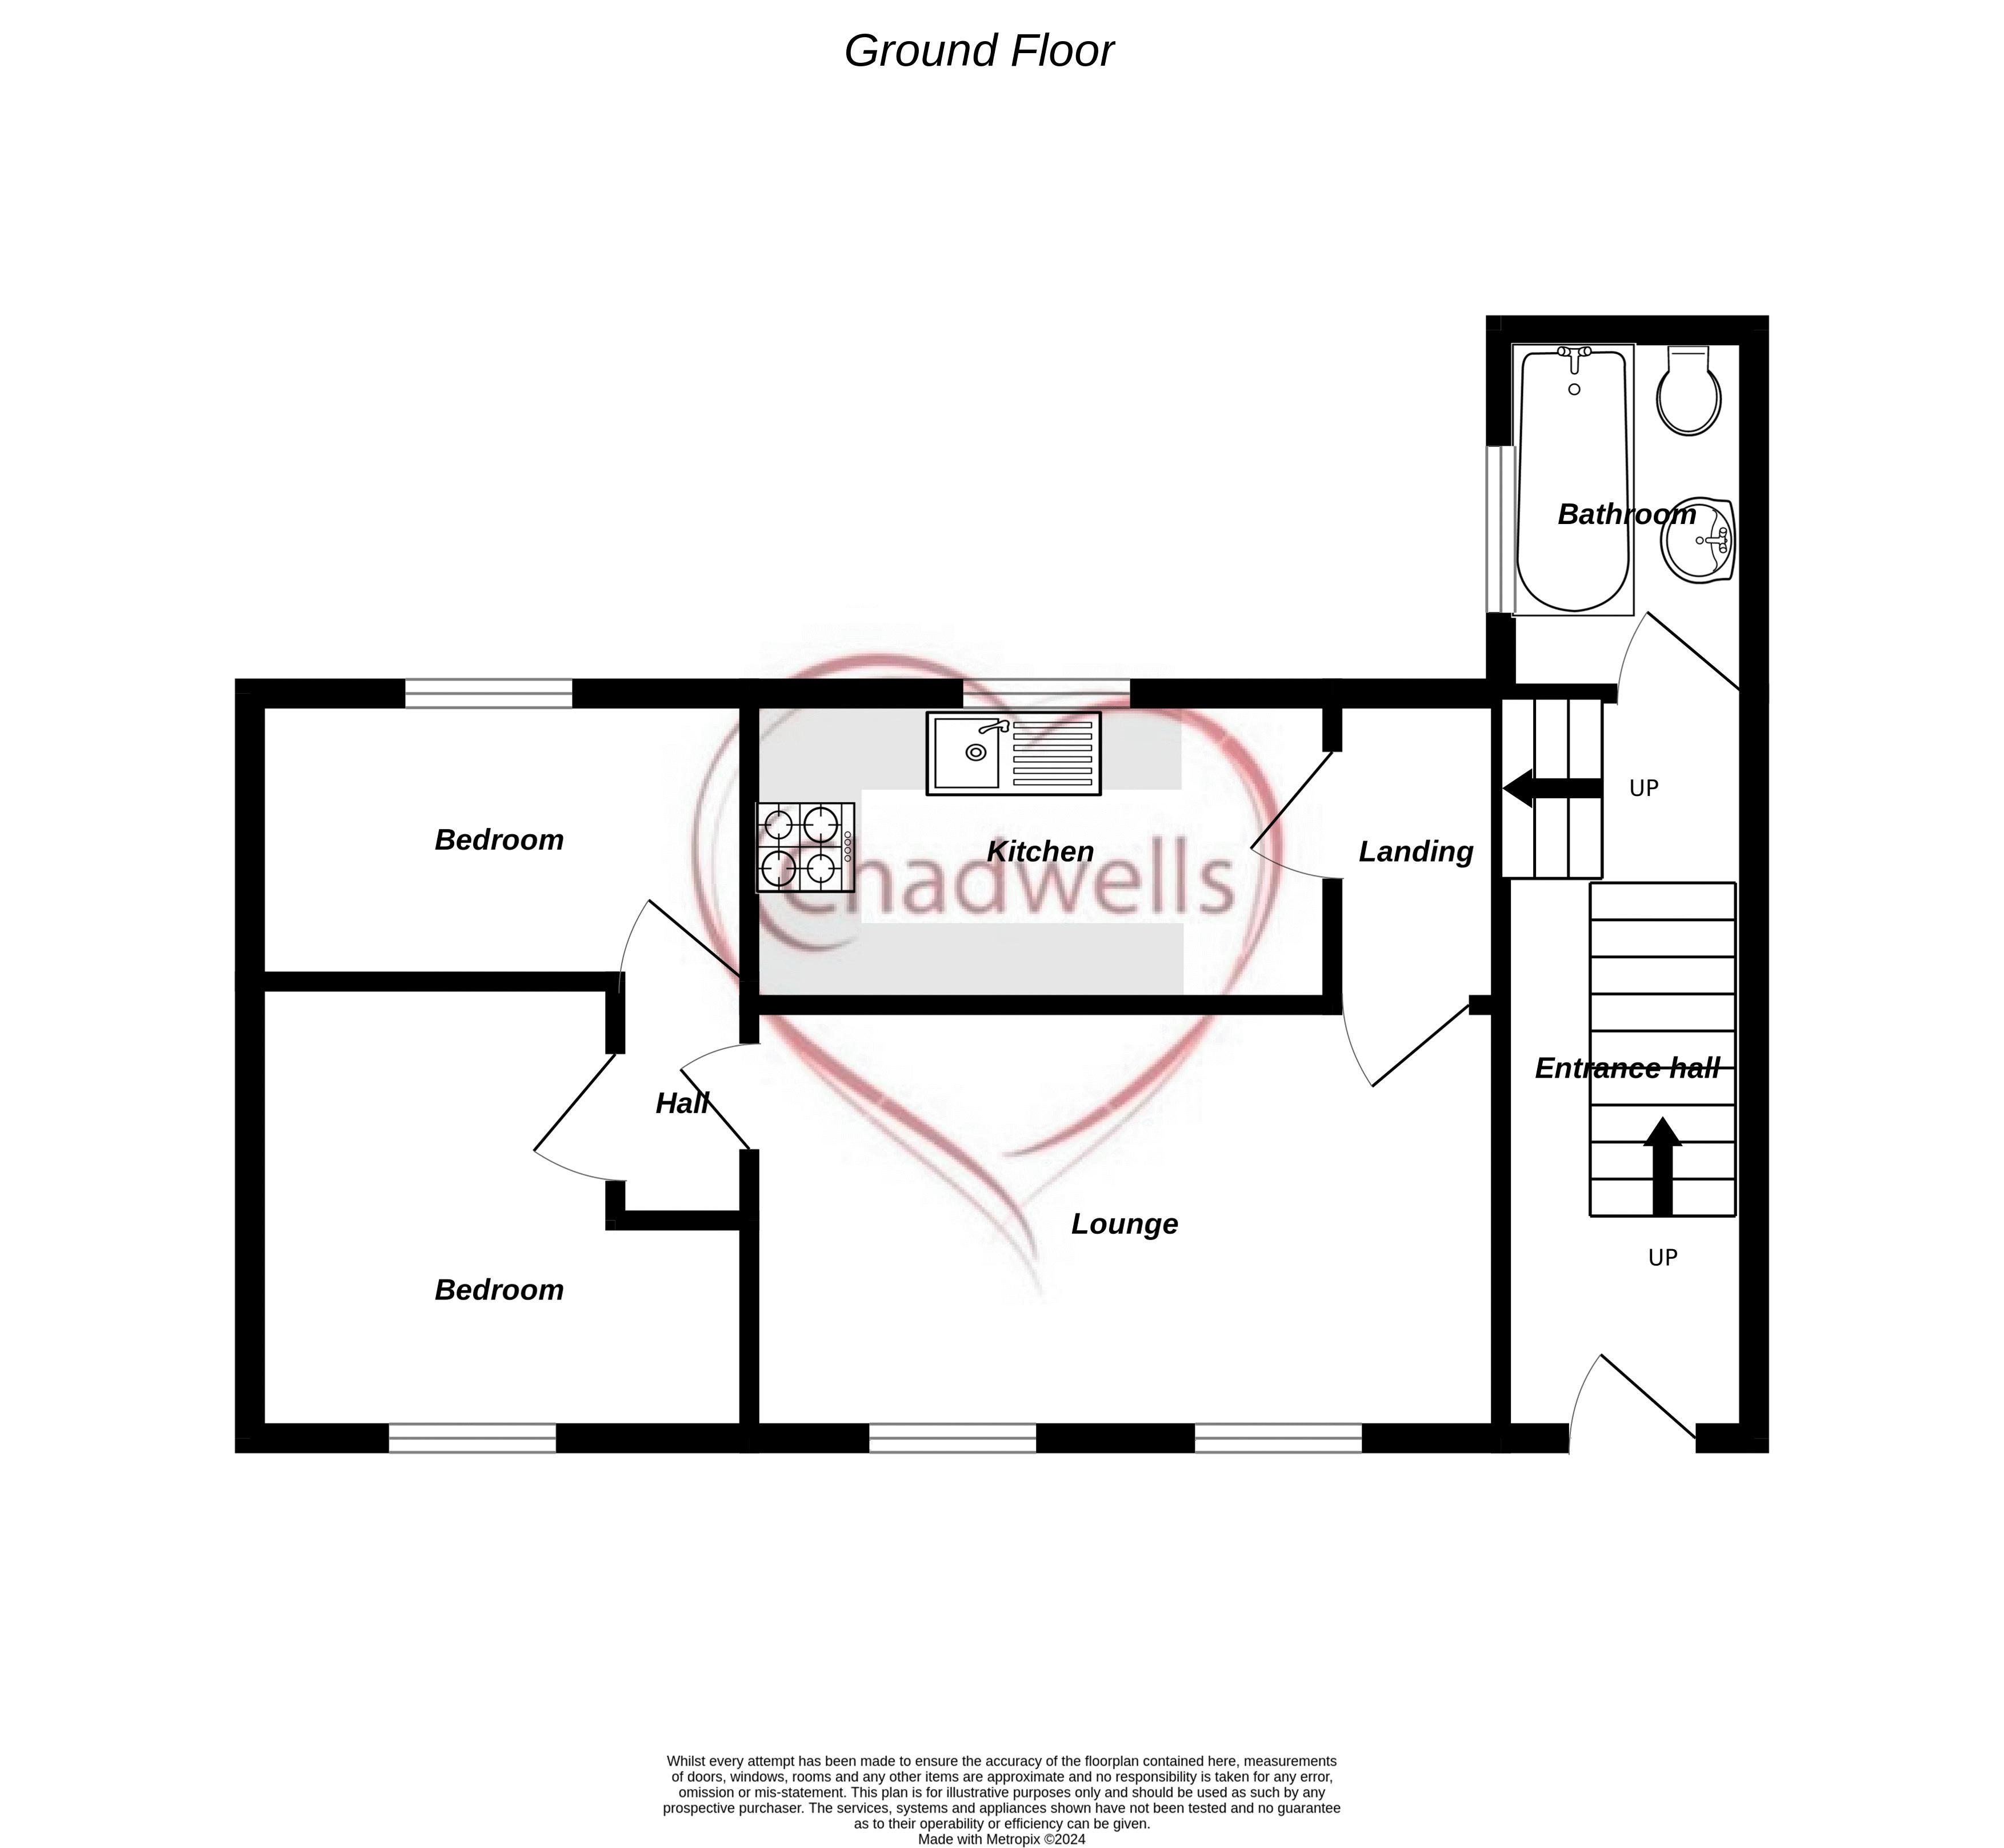 4 bed flat for sale in Walesby Lane, New Ollerton, NG22 - Property Floorplan